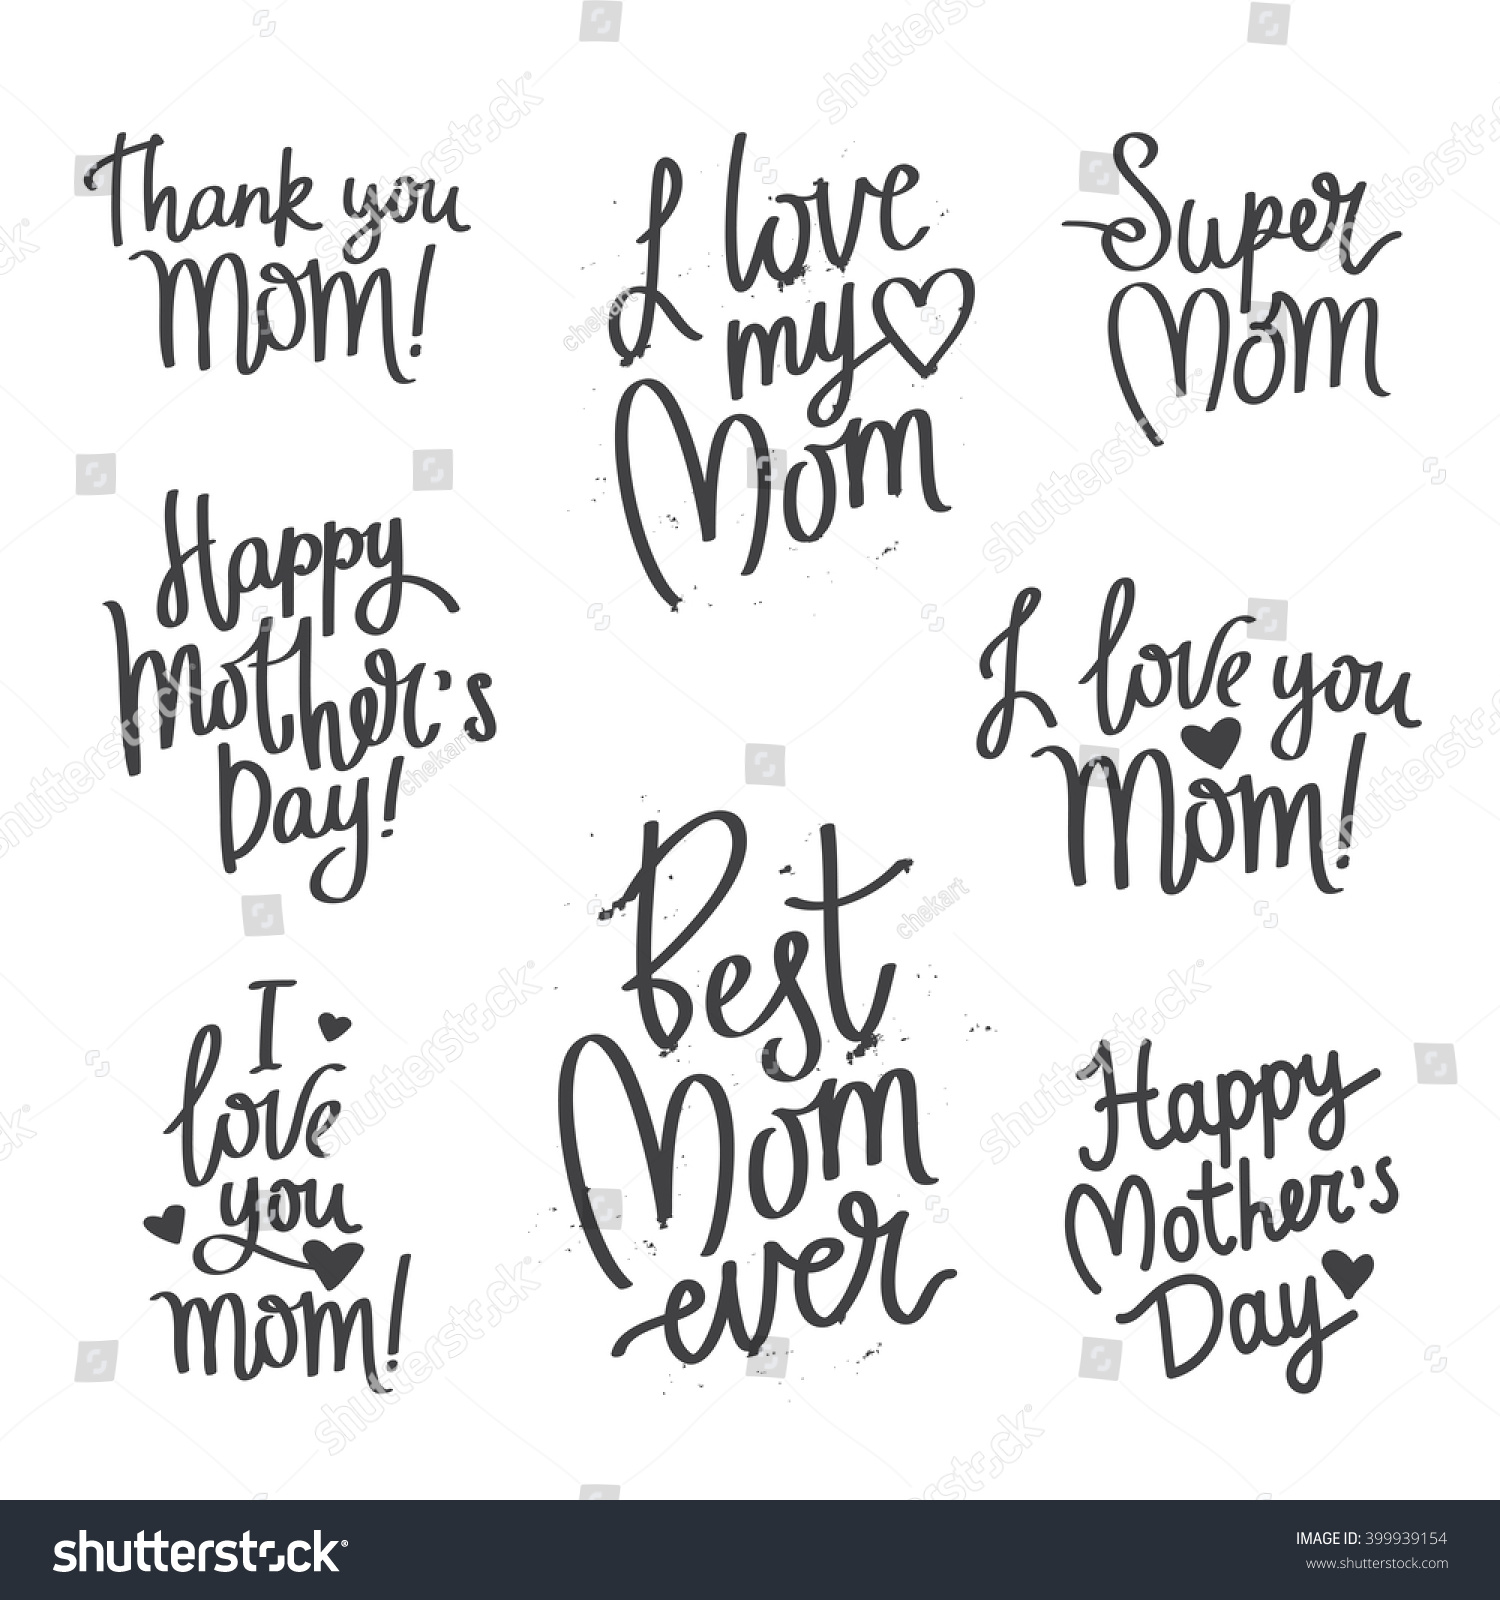 Quote I Love You Mom Fashionable calligraphy Excellent t card for Mother s Day